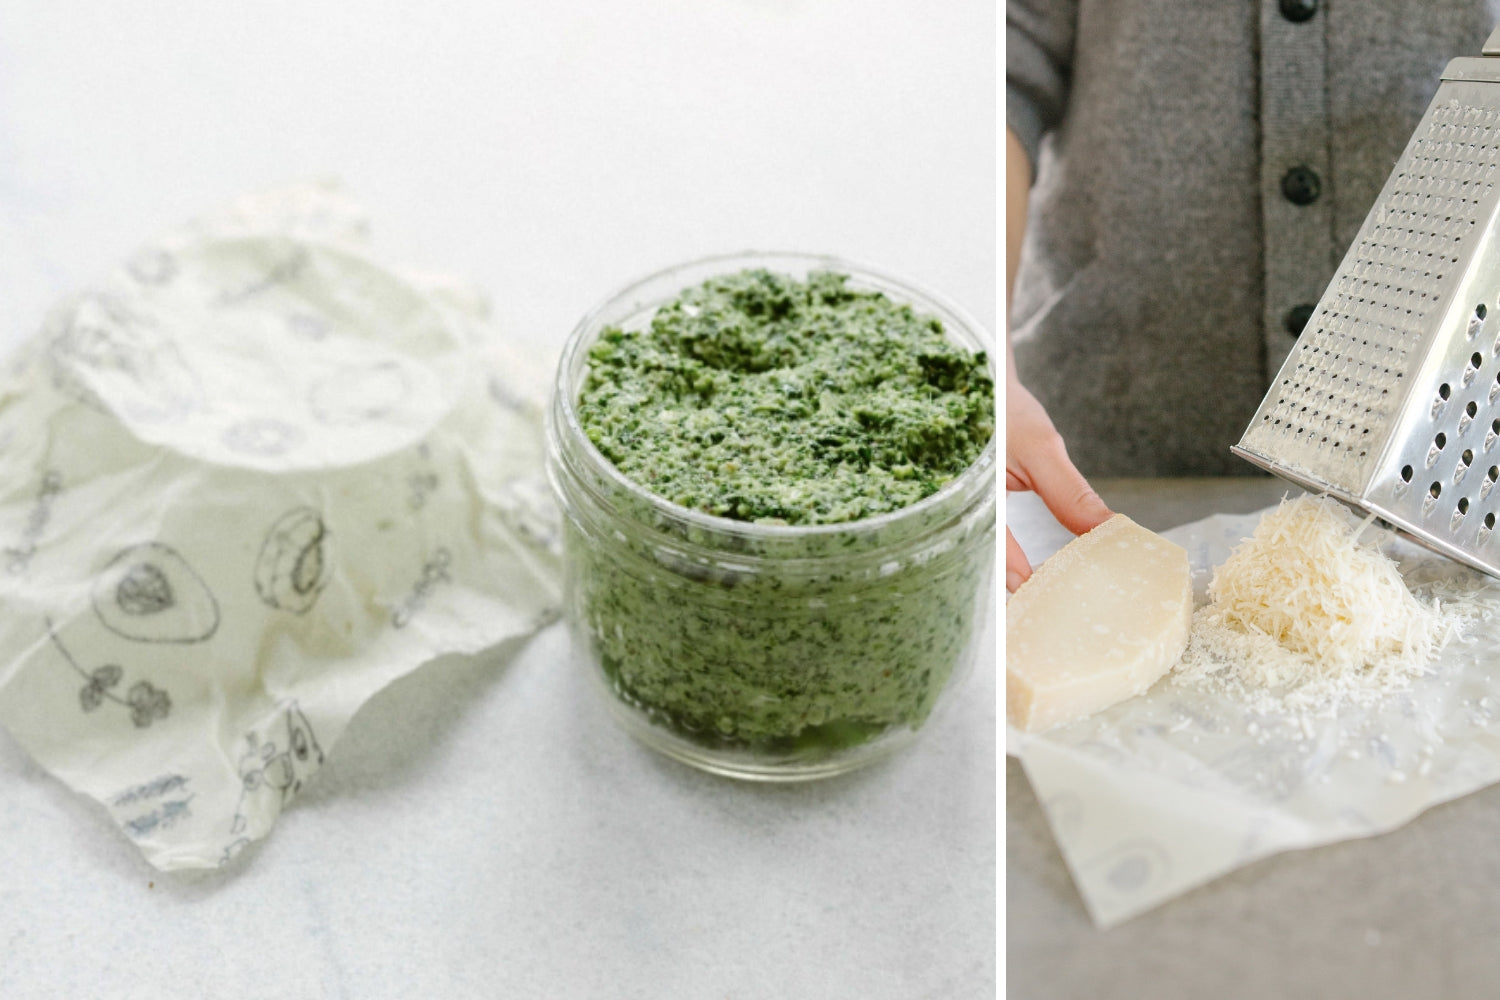 Using Abeego to cover kale pesto and cheese | beeswax wraps plastic wrap alternative